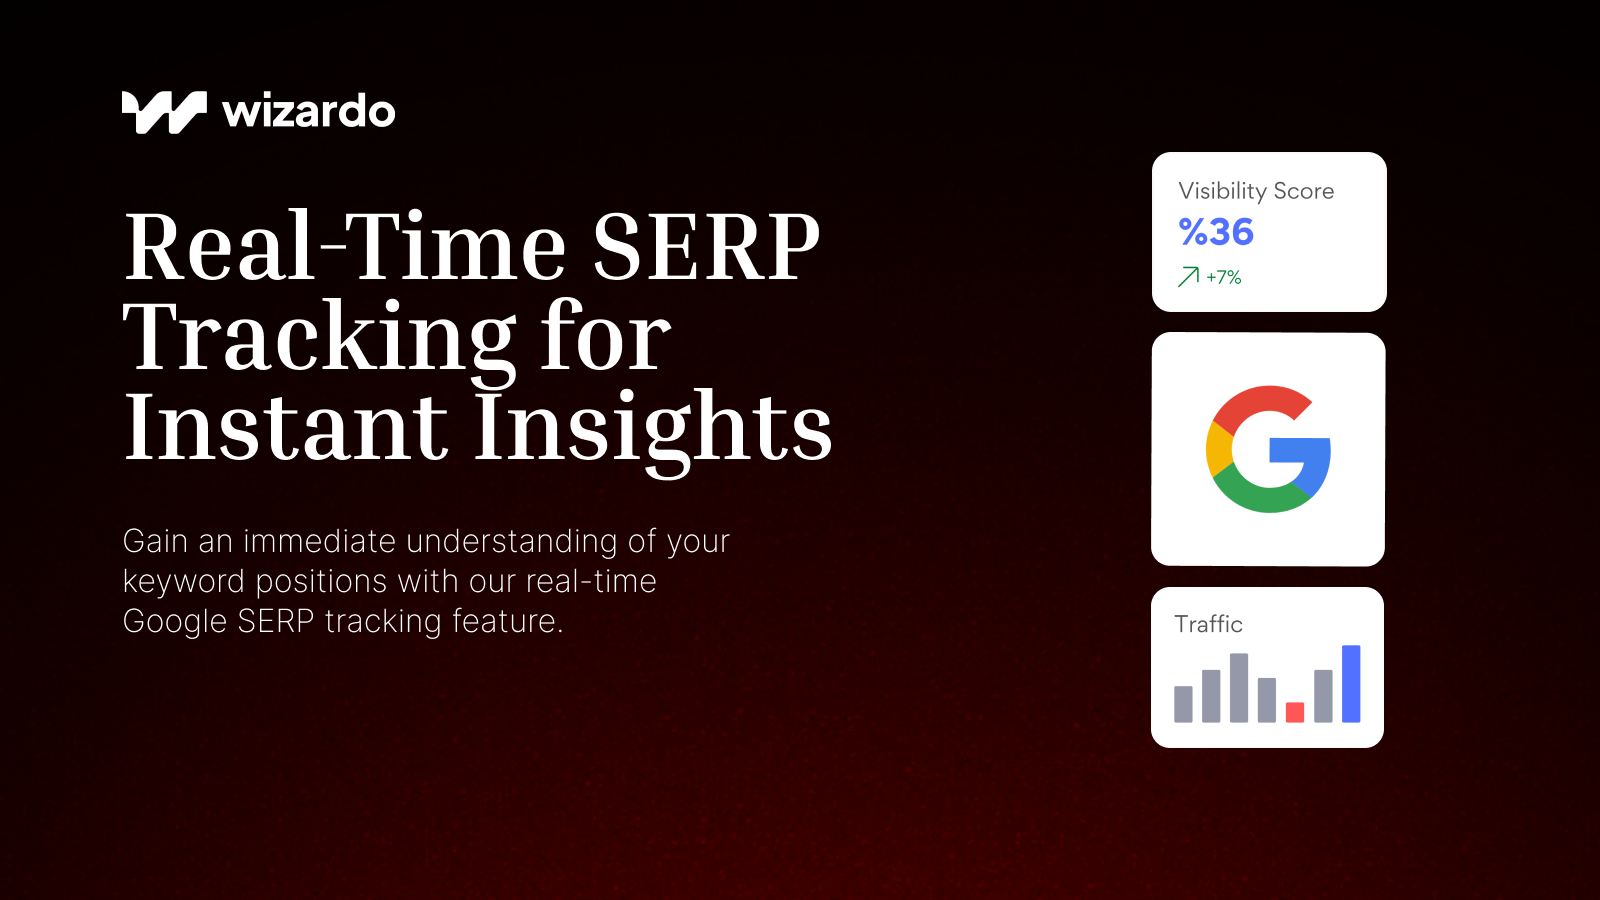 Wizardo: Real-Time SERP Tracking for Instant Insights